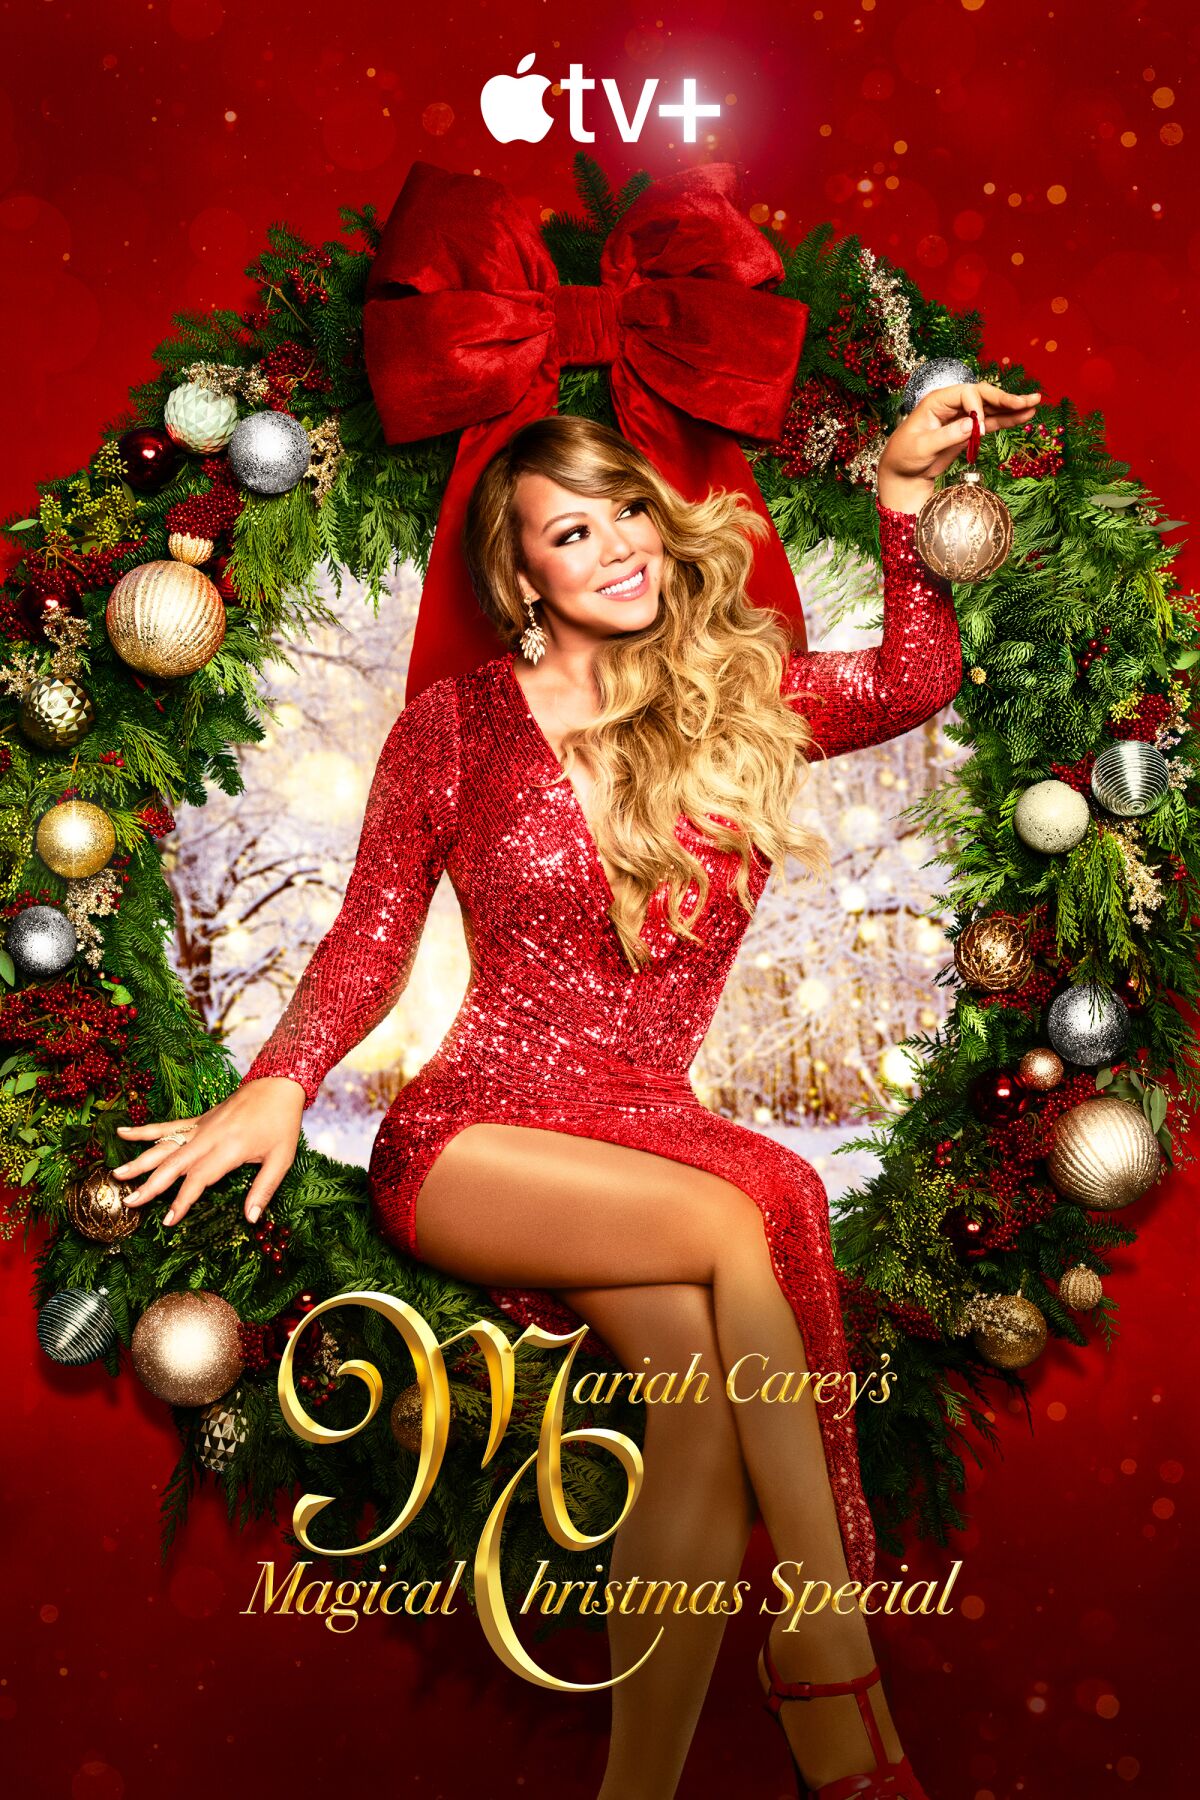 Mariah Carey in a red dress holding an ornament sitting in a Christmas wreath with a snowy woods scene behind her